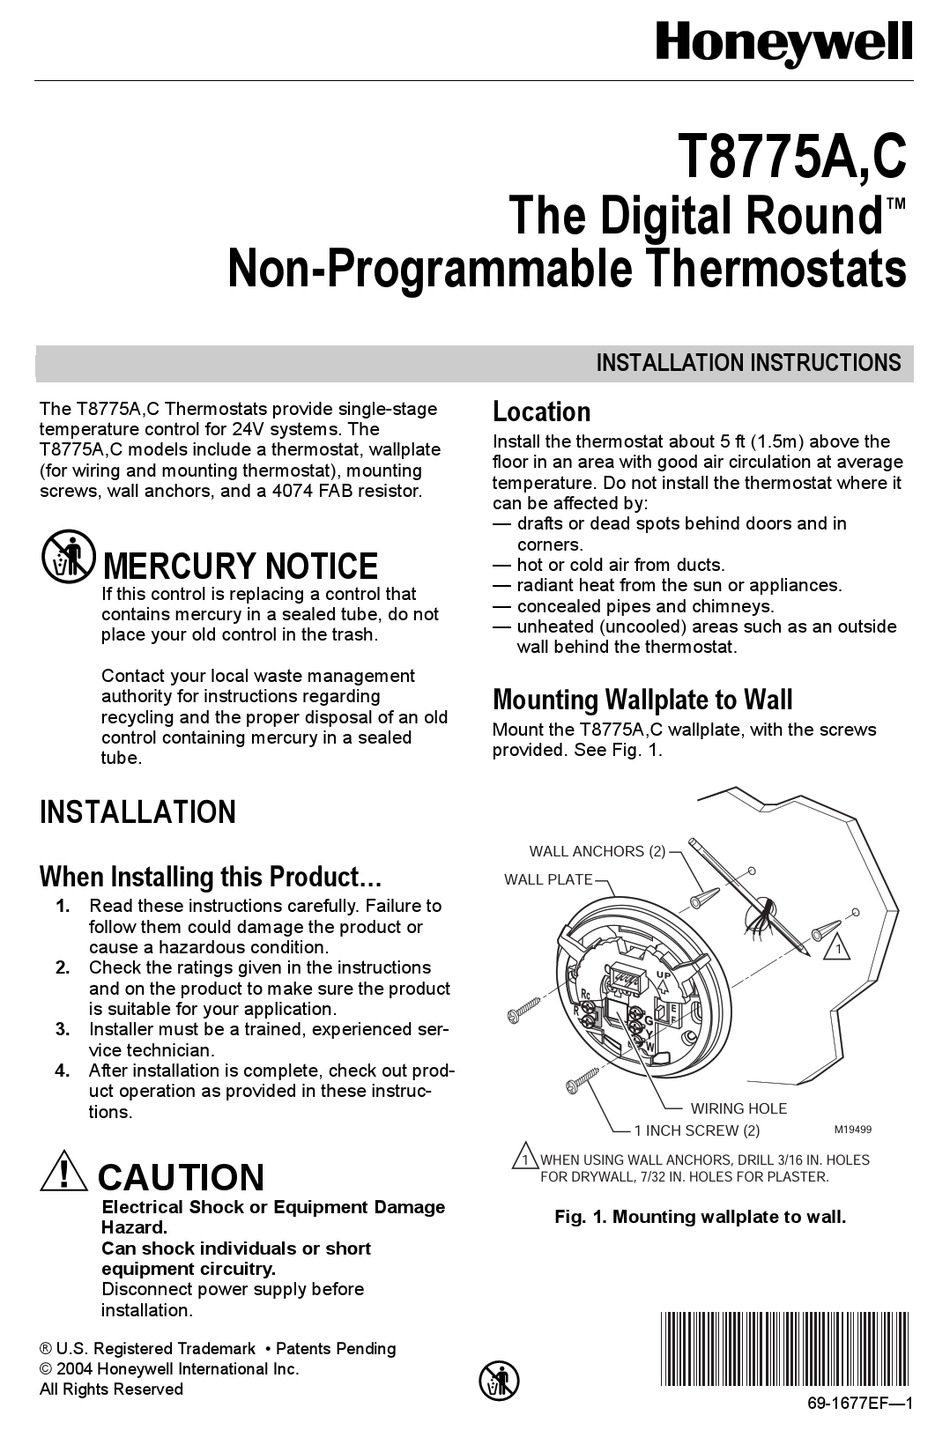 HONEYWELL ROUND T8775A INSTALLATION INSTRUCTIONS MANUAL Pdf Download